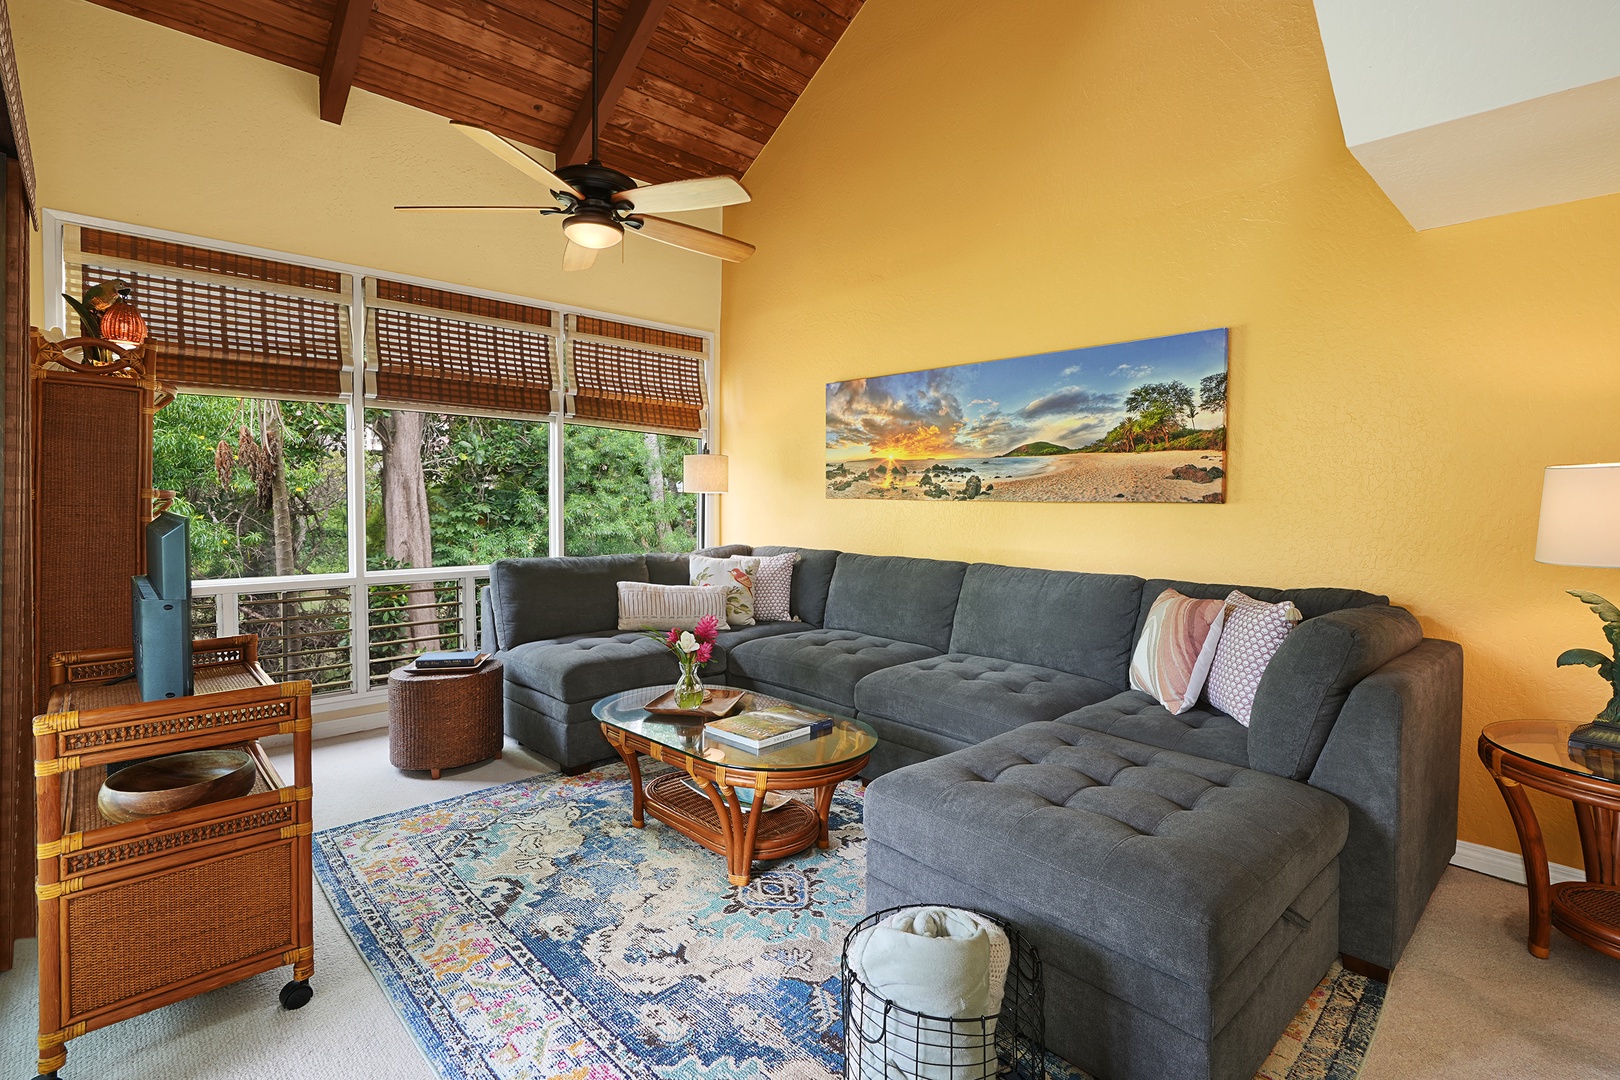 Koloa Vacation Rentals, Kauai Birdsong at Poipu Crater - The living area greats you with a vaulted ceiling, and an airy and welcoming vibe with lots of outdoor views.